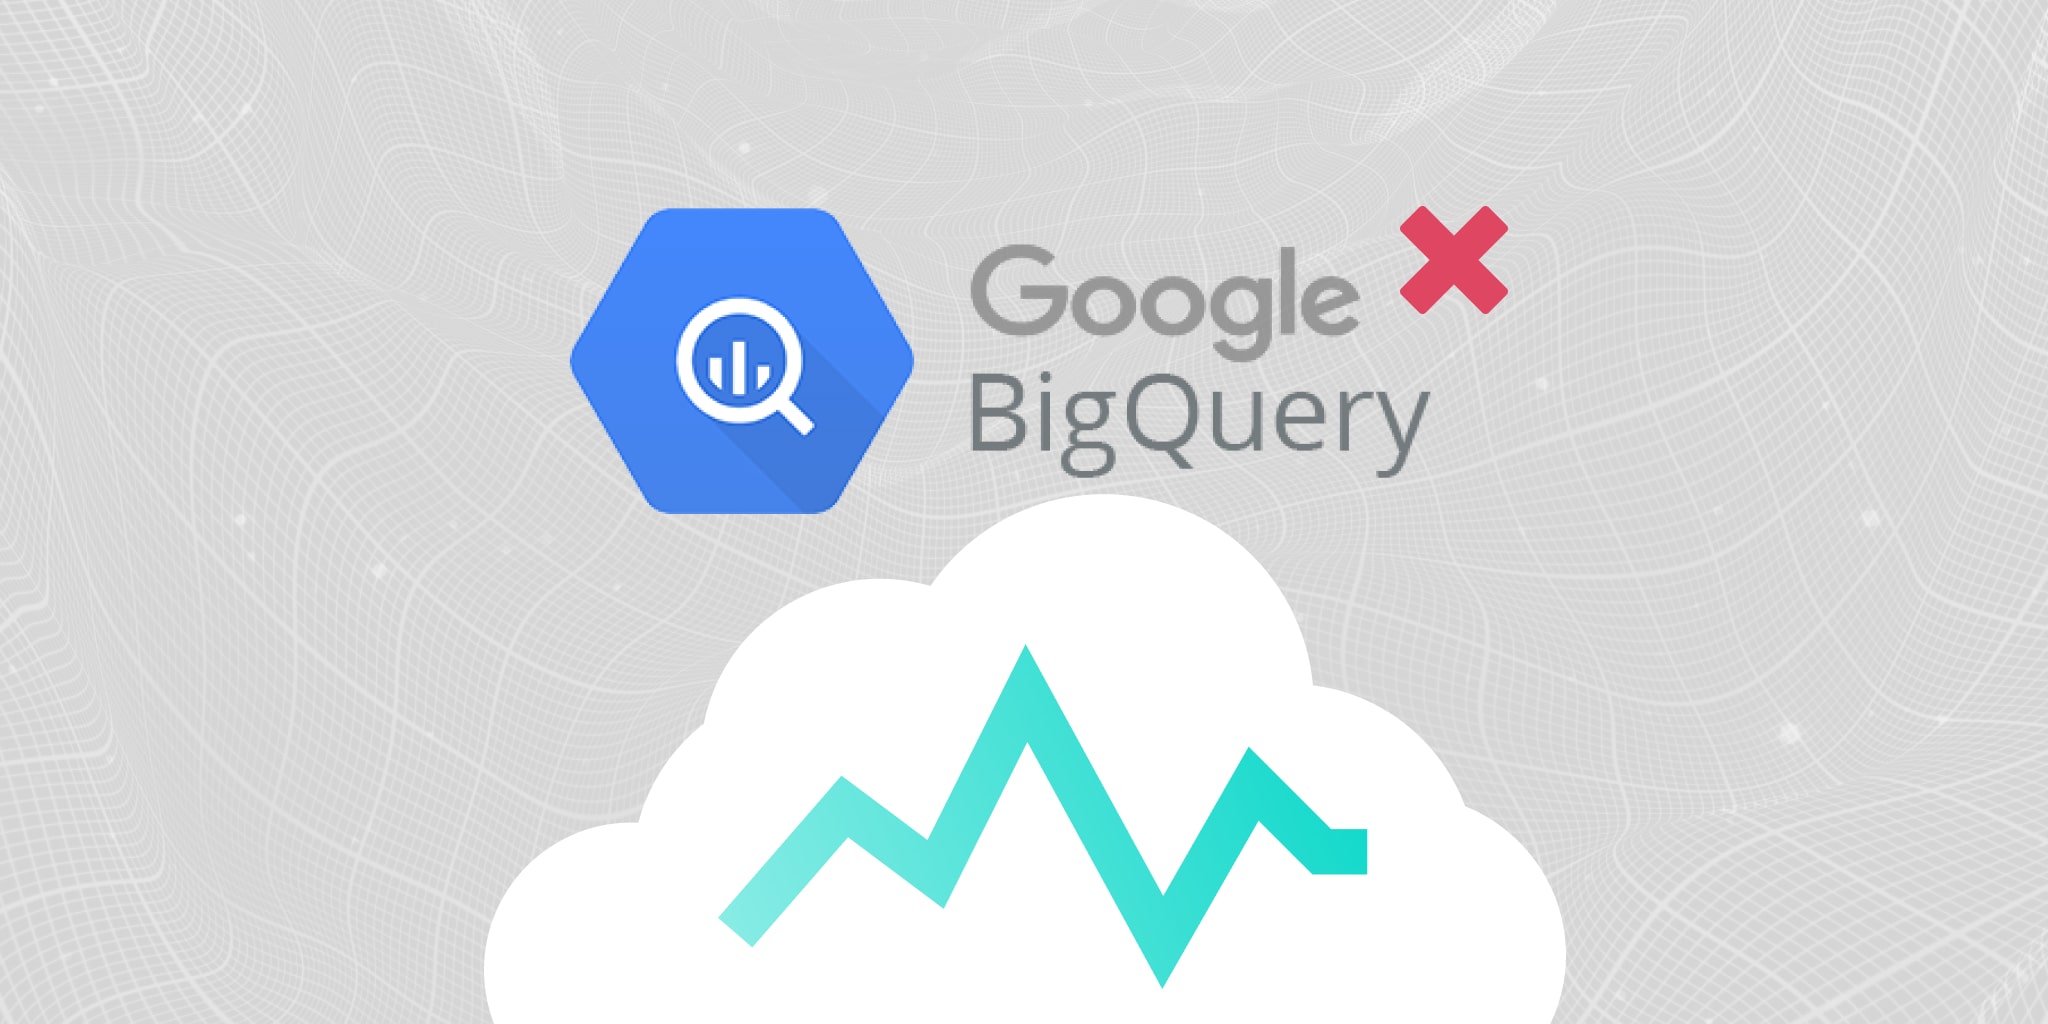 3 Things To Watch Out For With Google Bigquery For Cloud Analytics